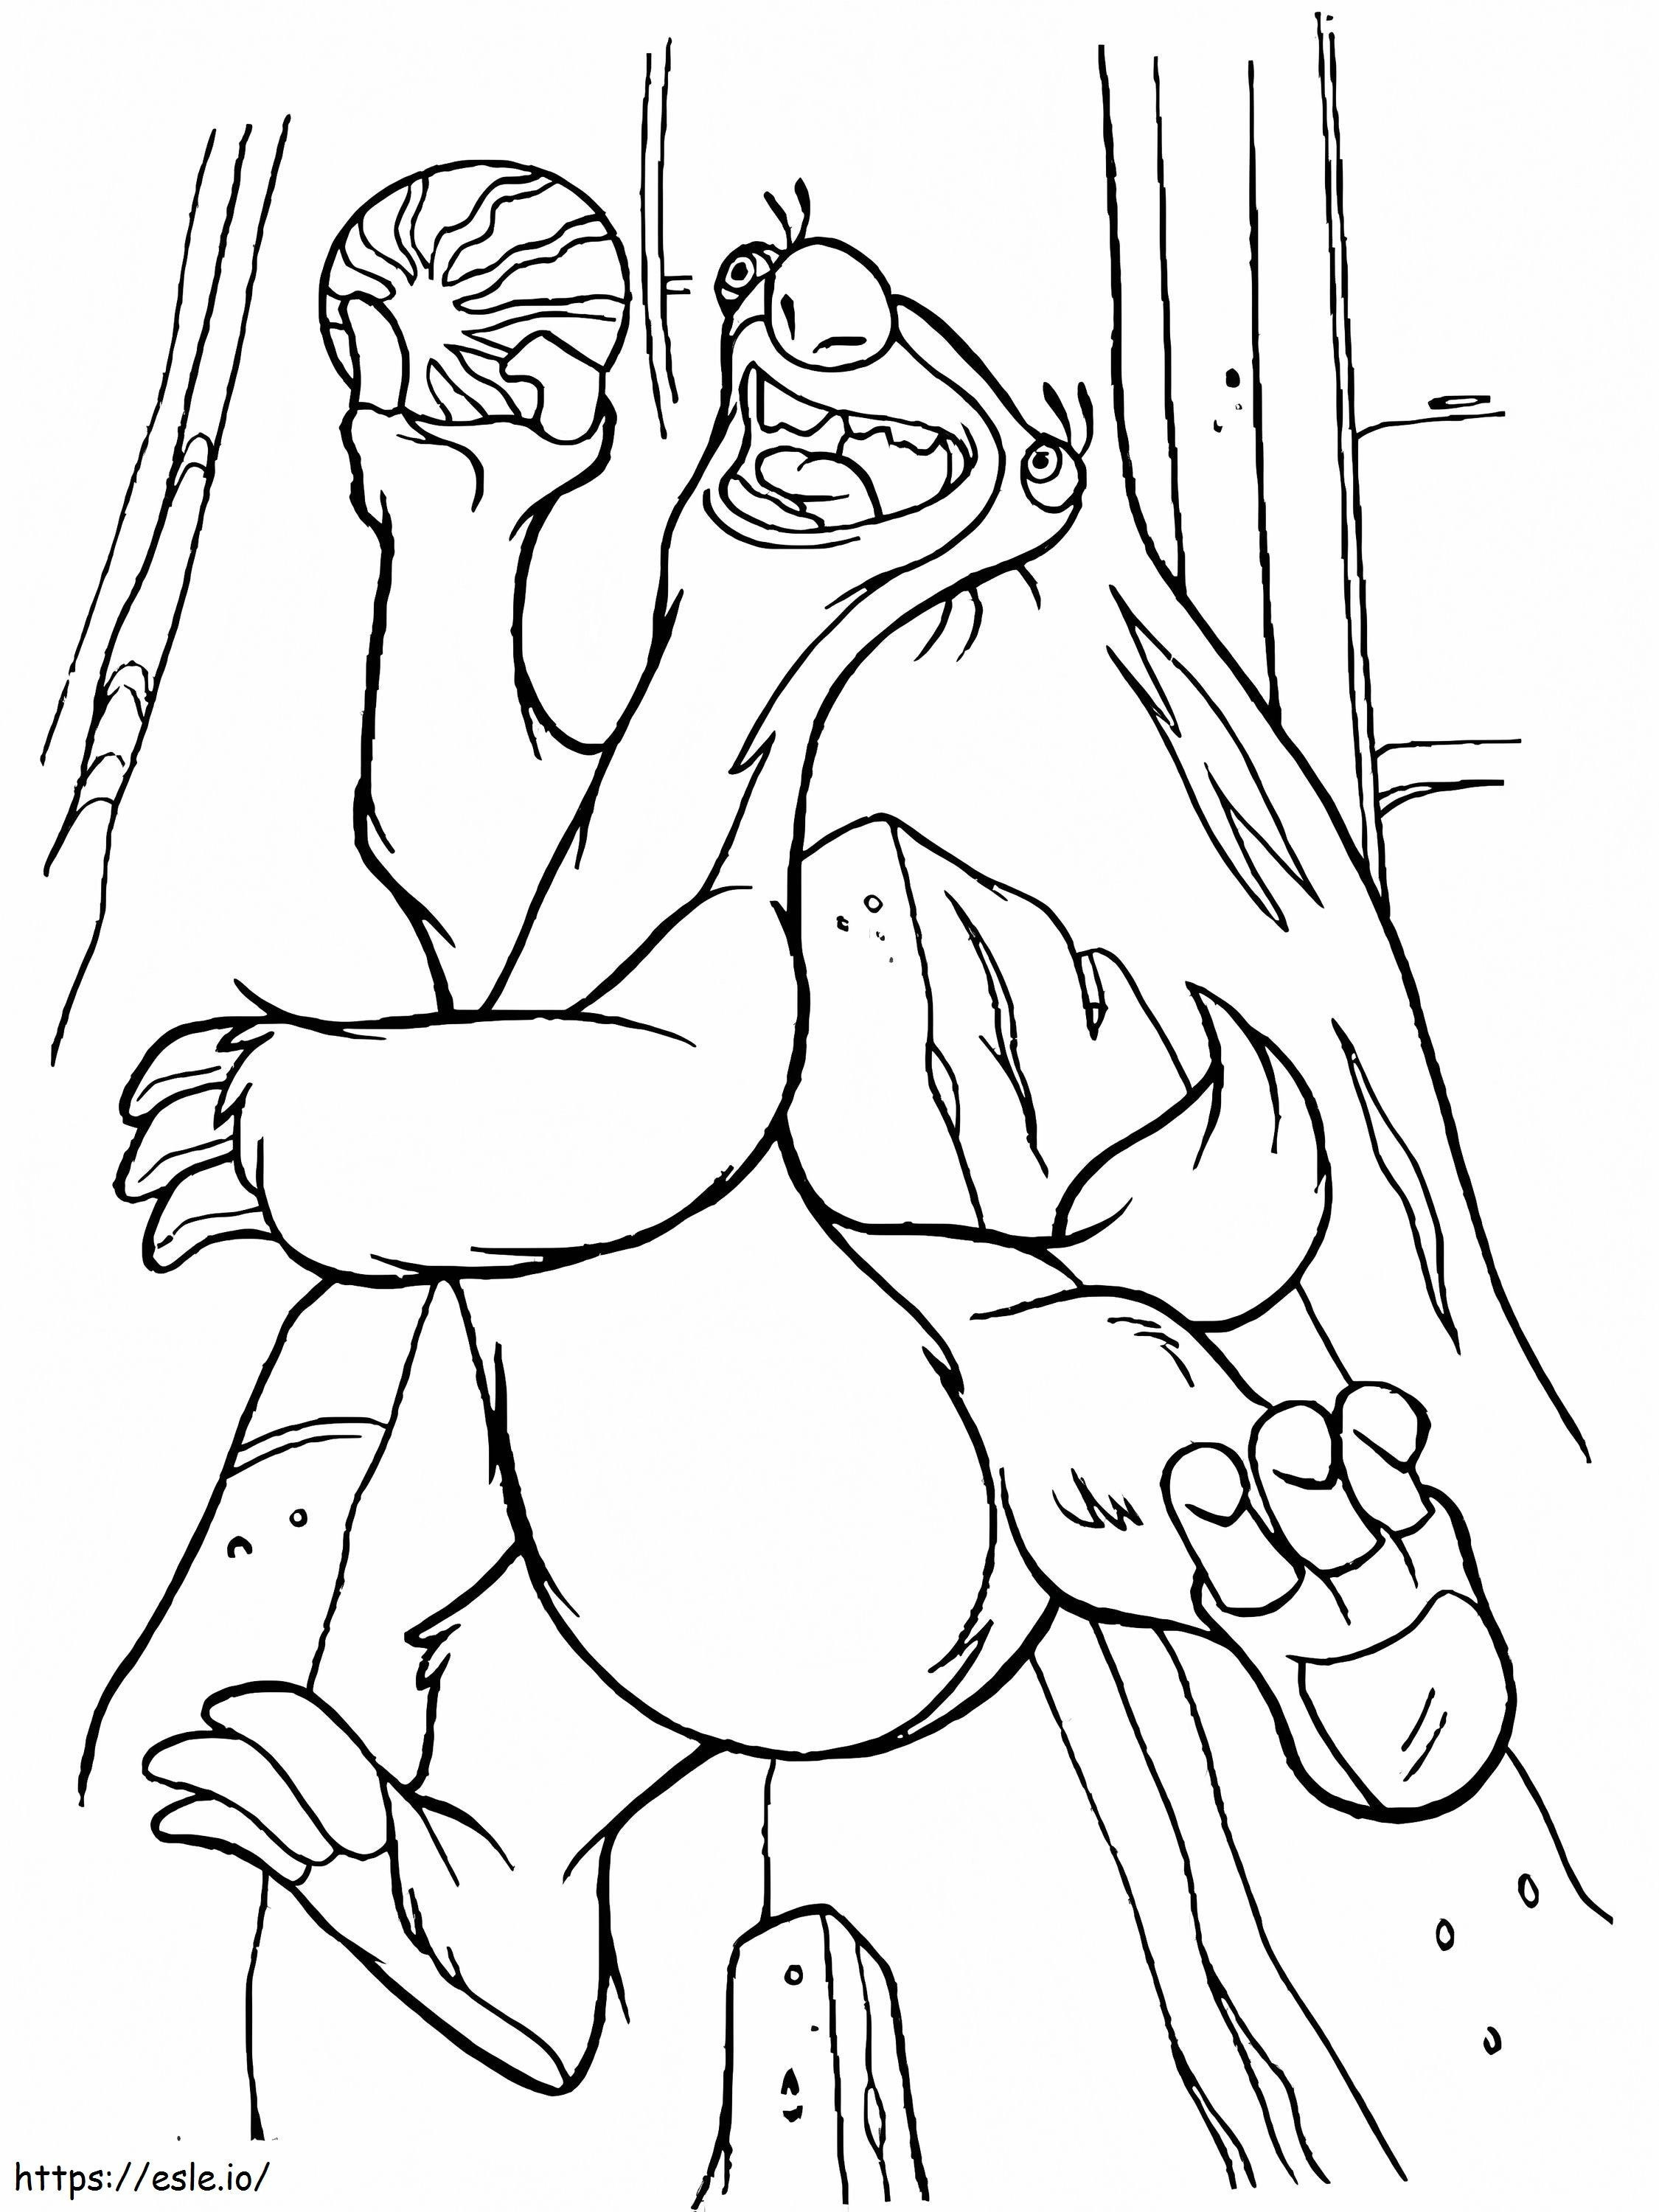 Sid Caught Holding A Watermelon coloring page